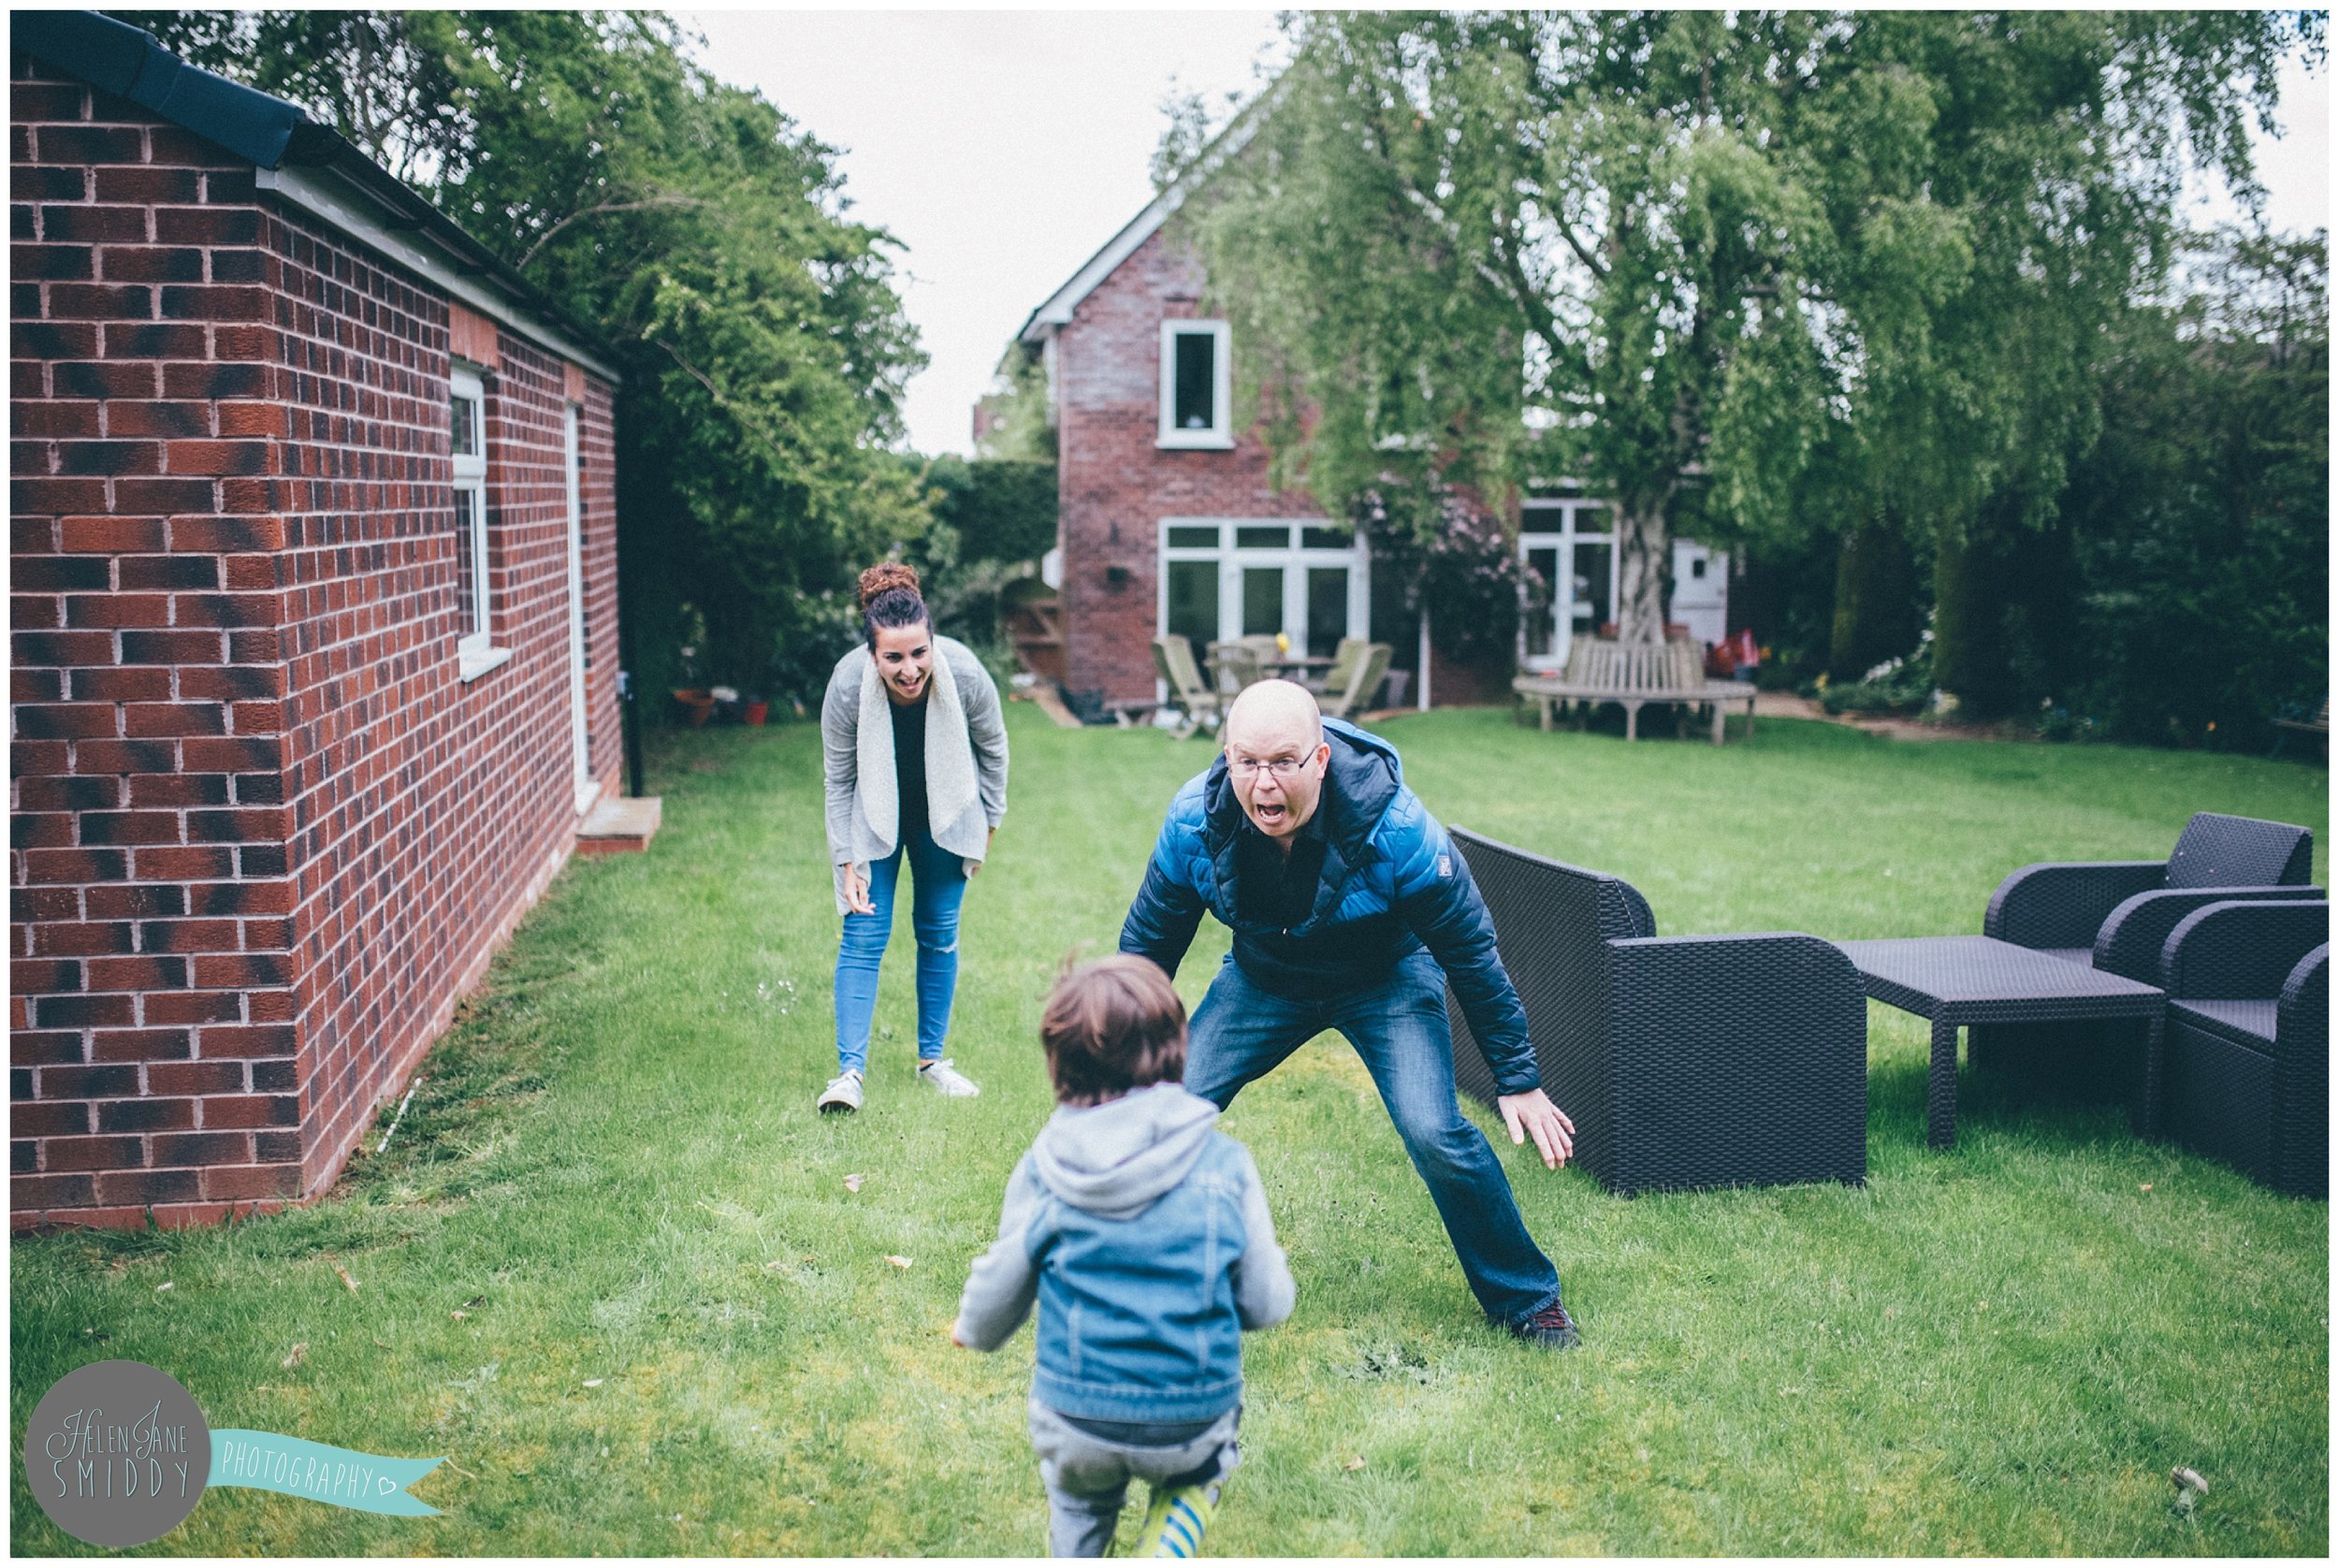 Family time in their Frodsham garden during an A Day In The Life photoshoot in Cheshire.